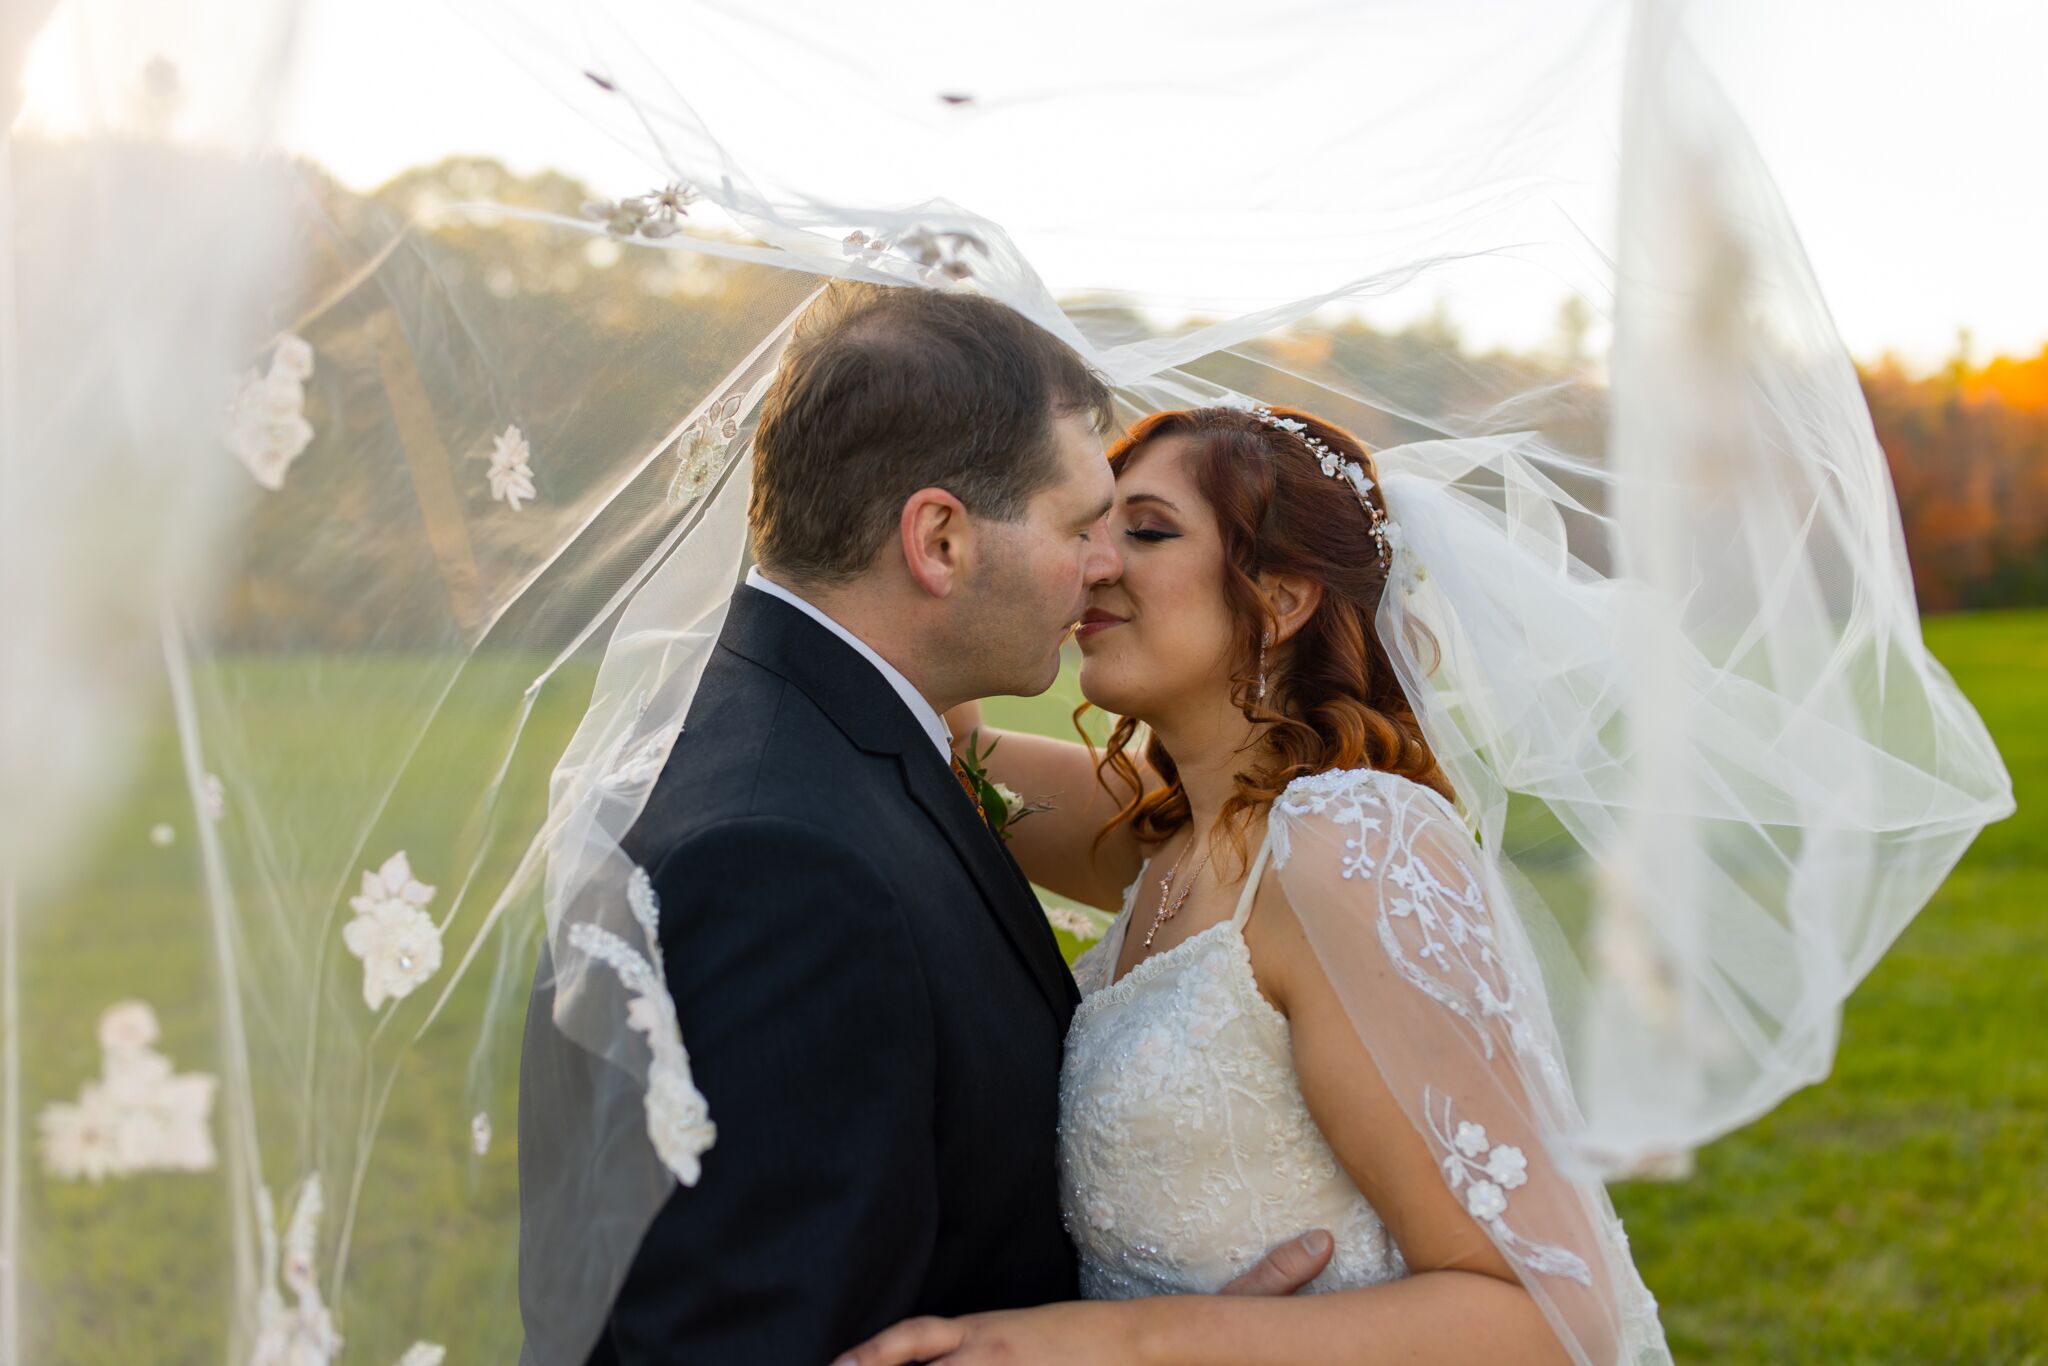 Carly Storro Photography | Wedding Photographers - The Knot